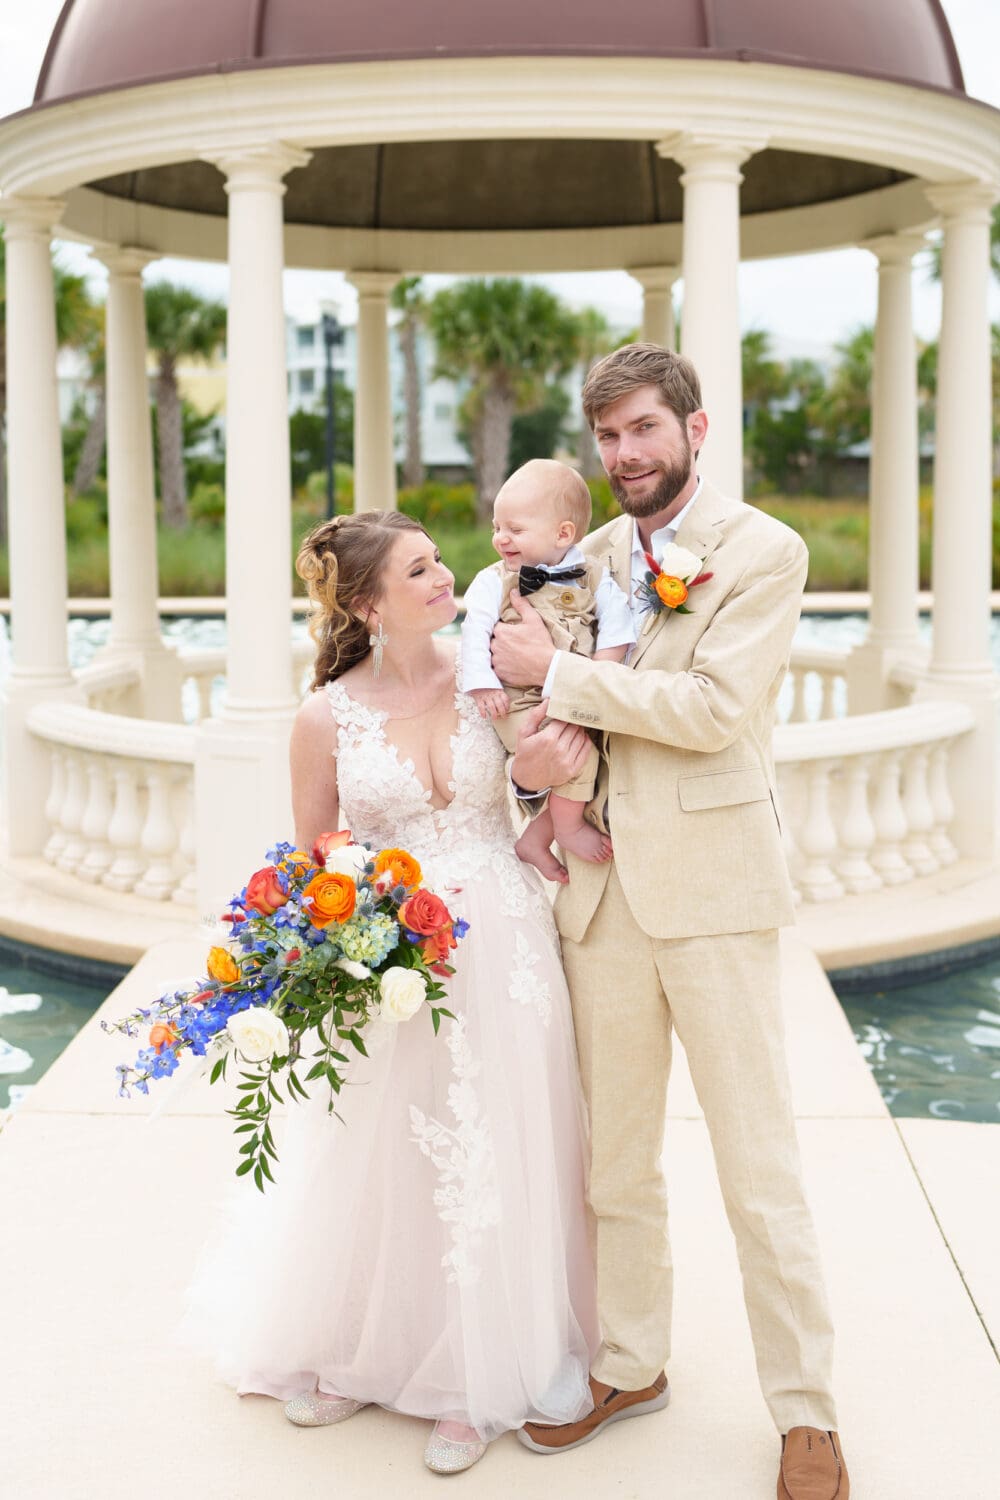 Bride and groom with their happy baby boy - 21 Main Events - North Myrtle Beach